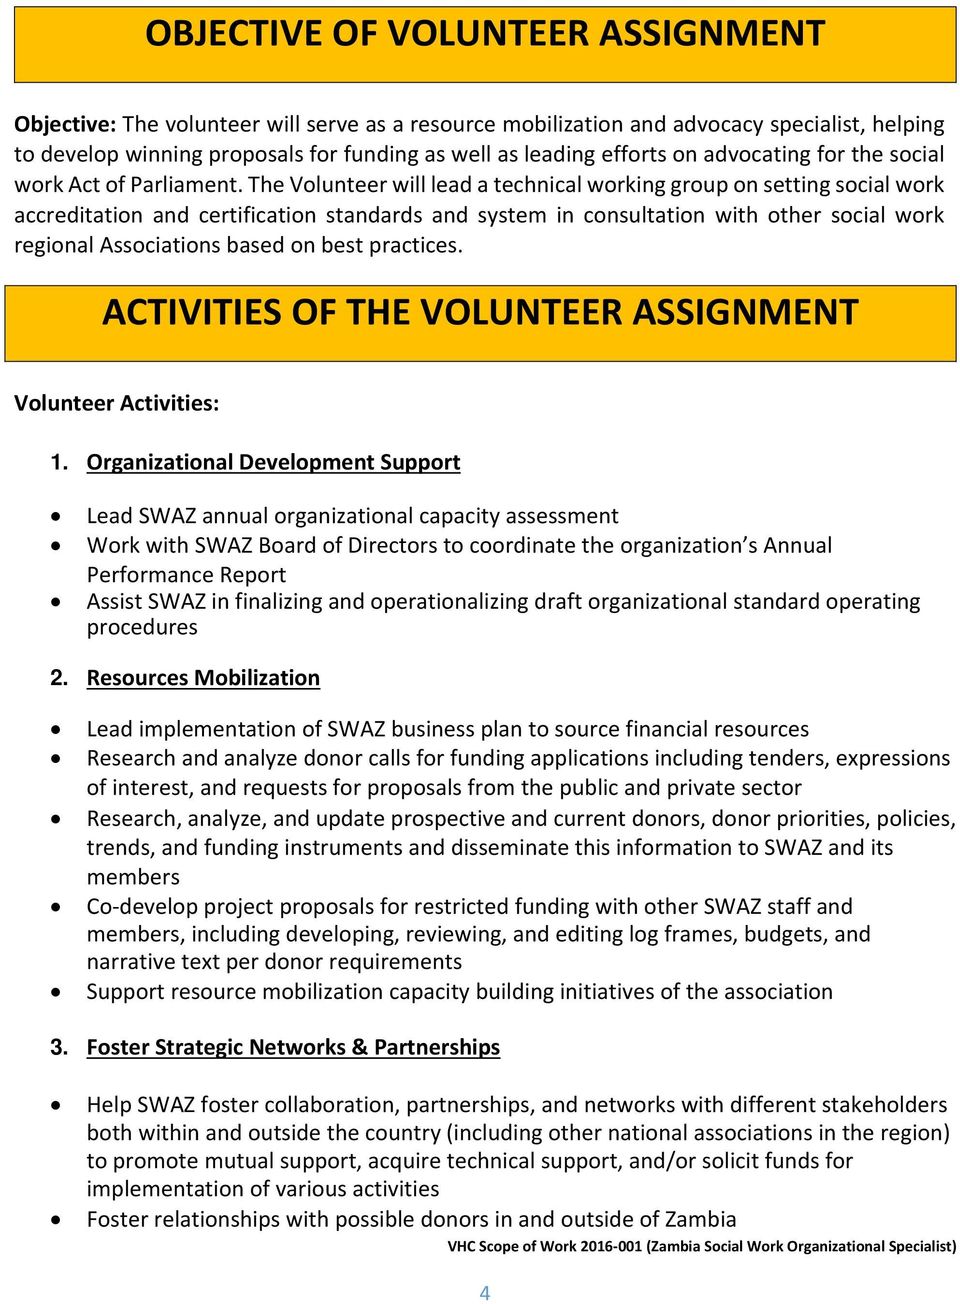 The Volunteer will lead a technical working group on setting social work accreditation and certification standards and system in consultation with other social work regional Associations based on